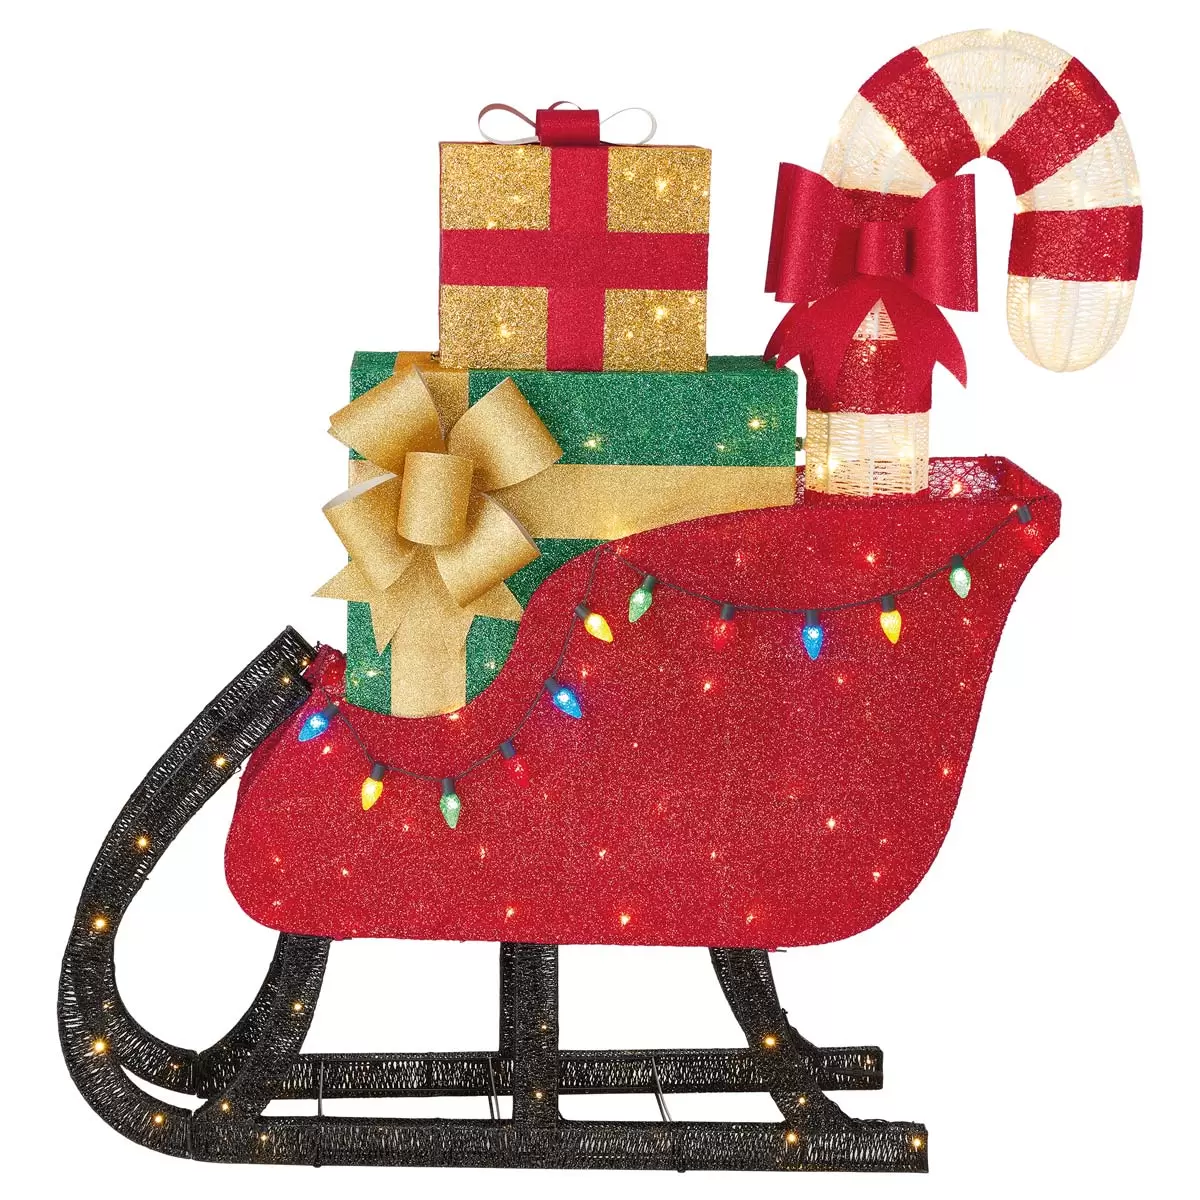 Buy Glitter String LED Sleigh Side1 Image at Costco.co.uk